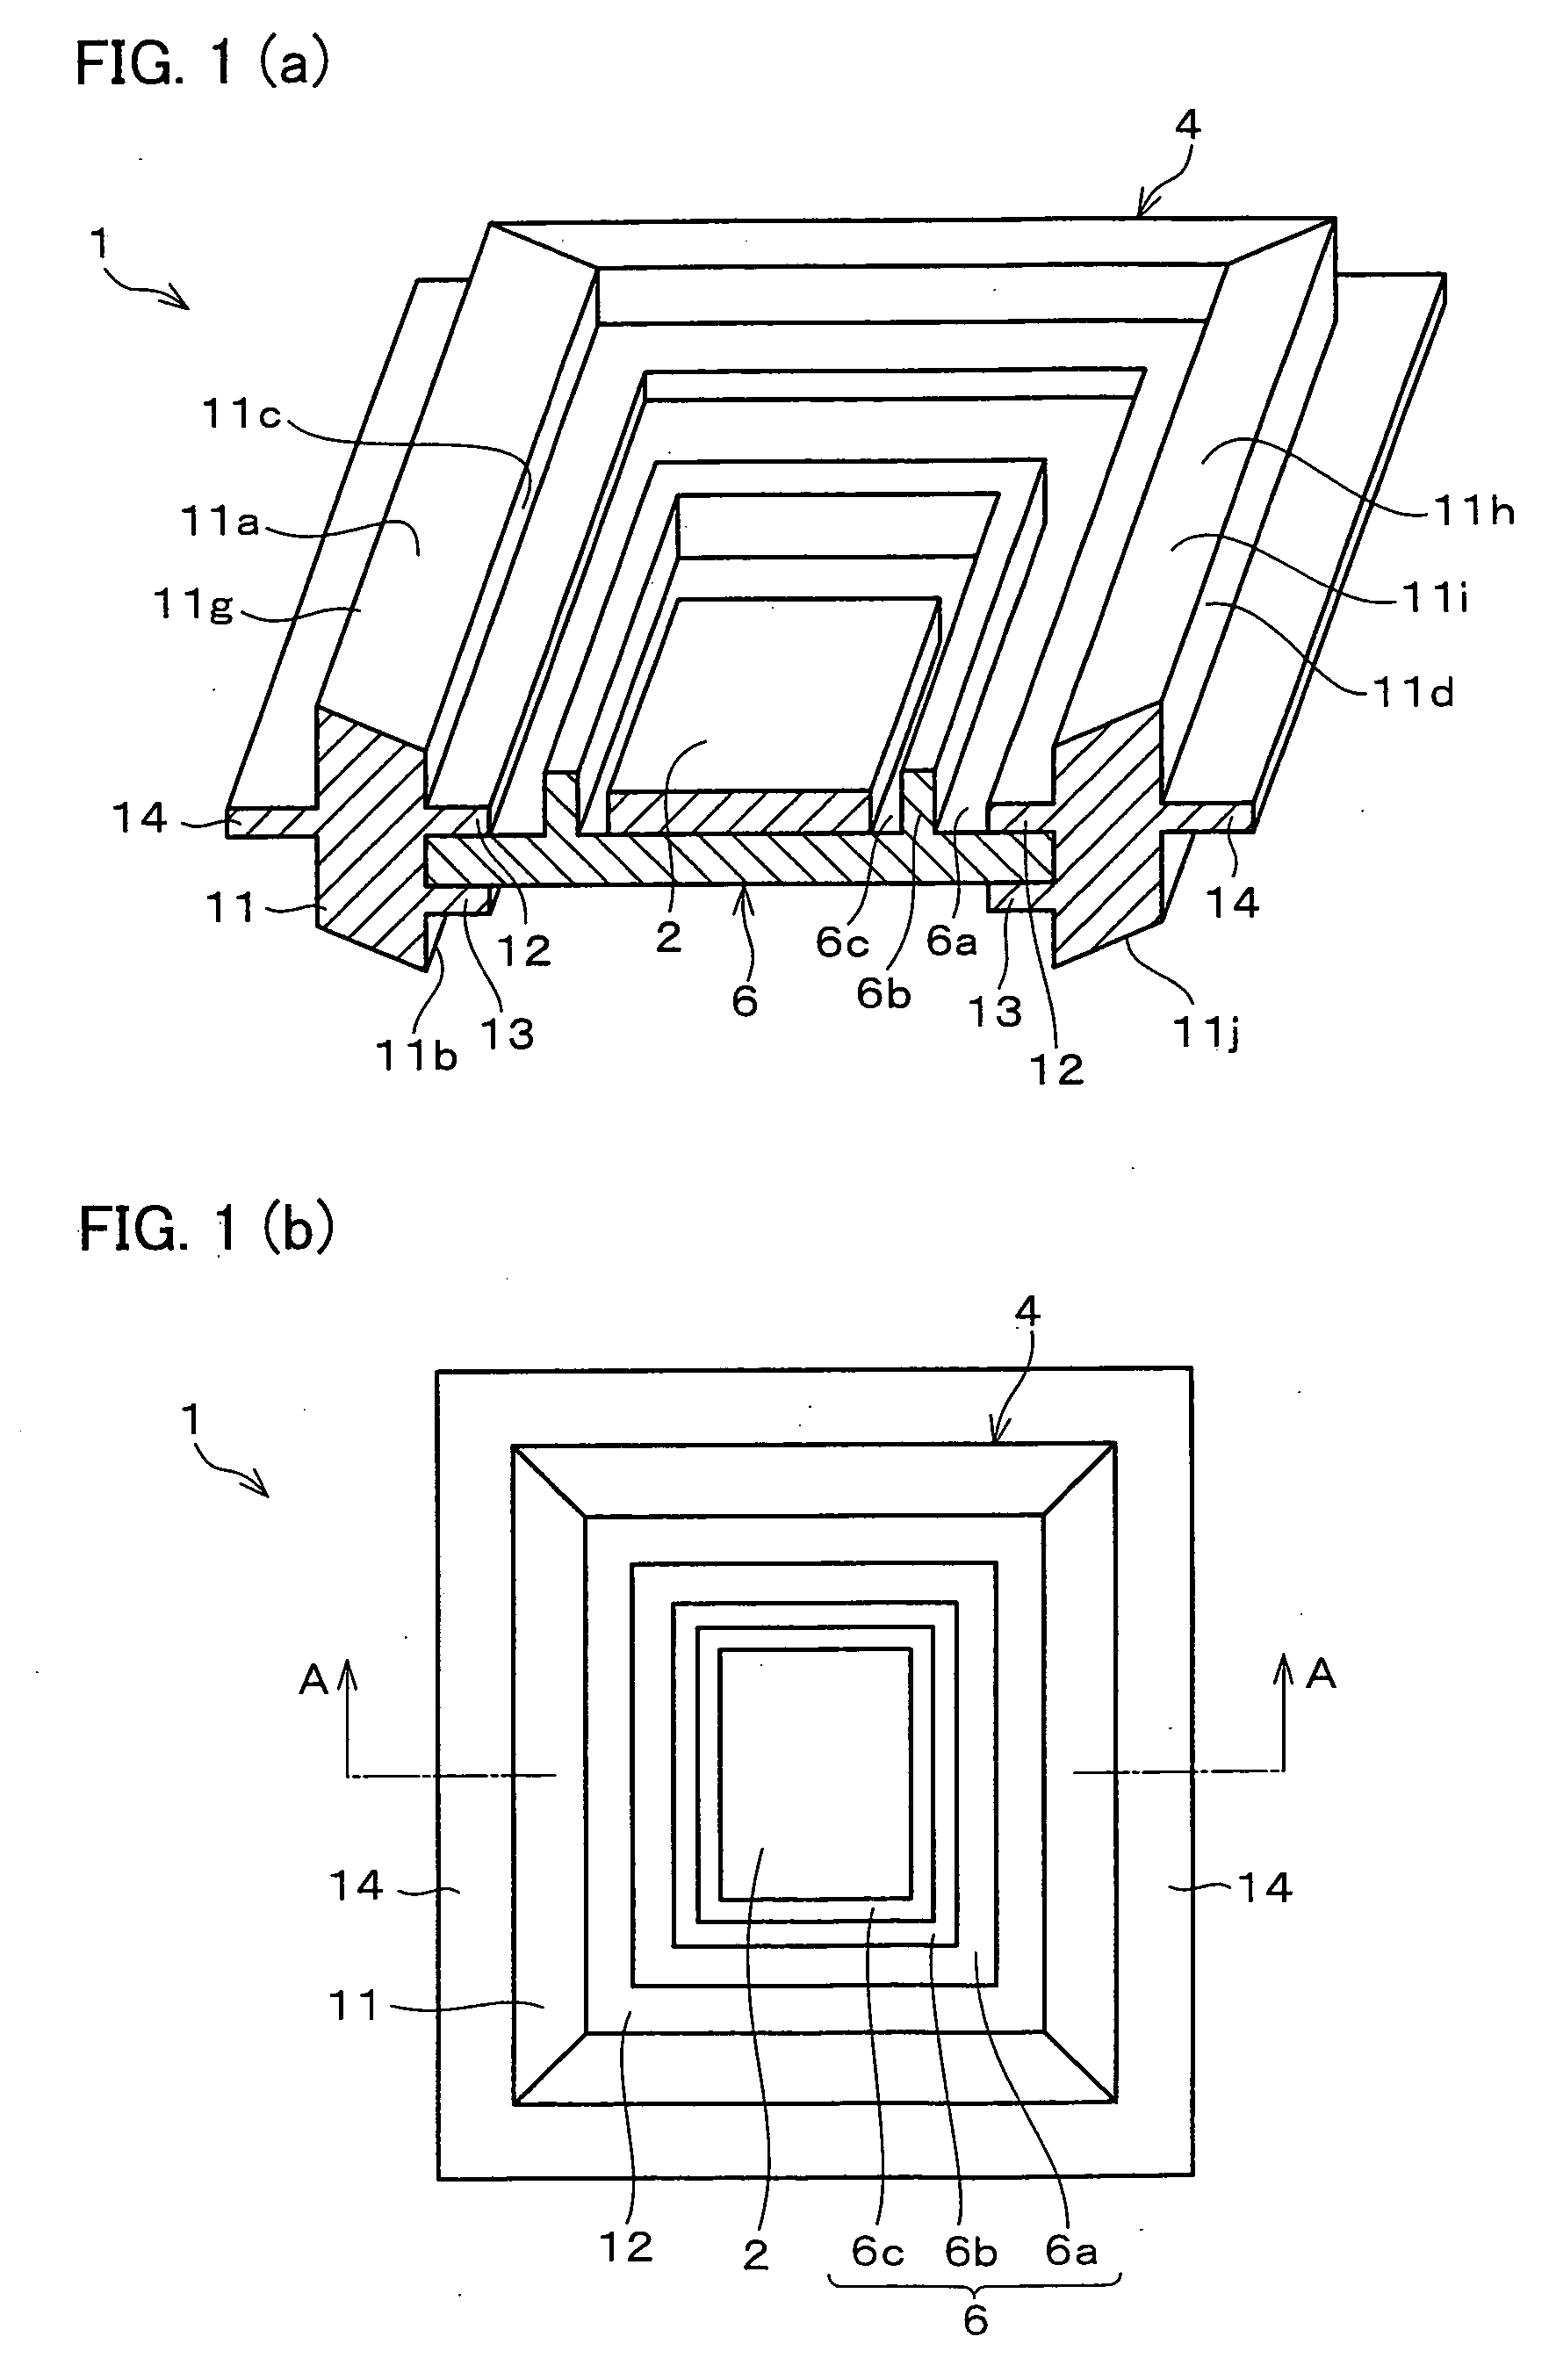 Substrate carrying tray